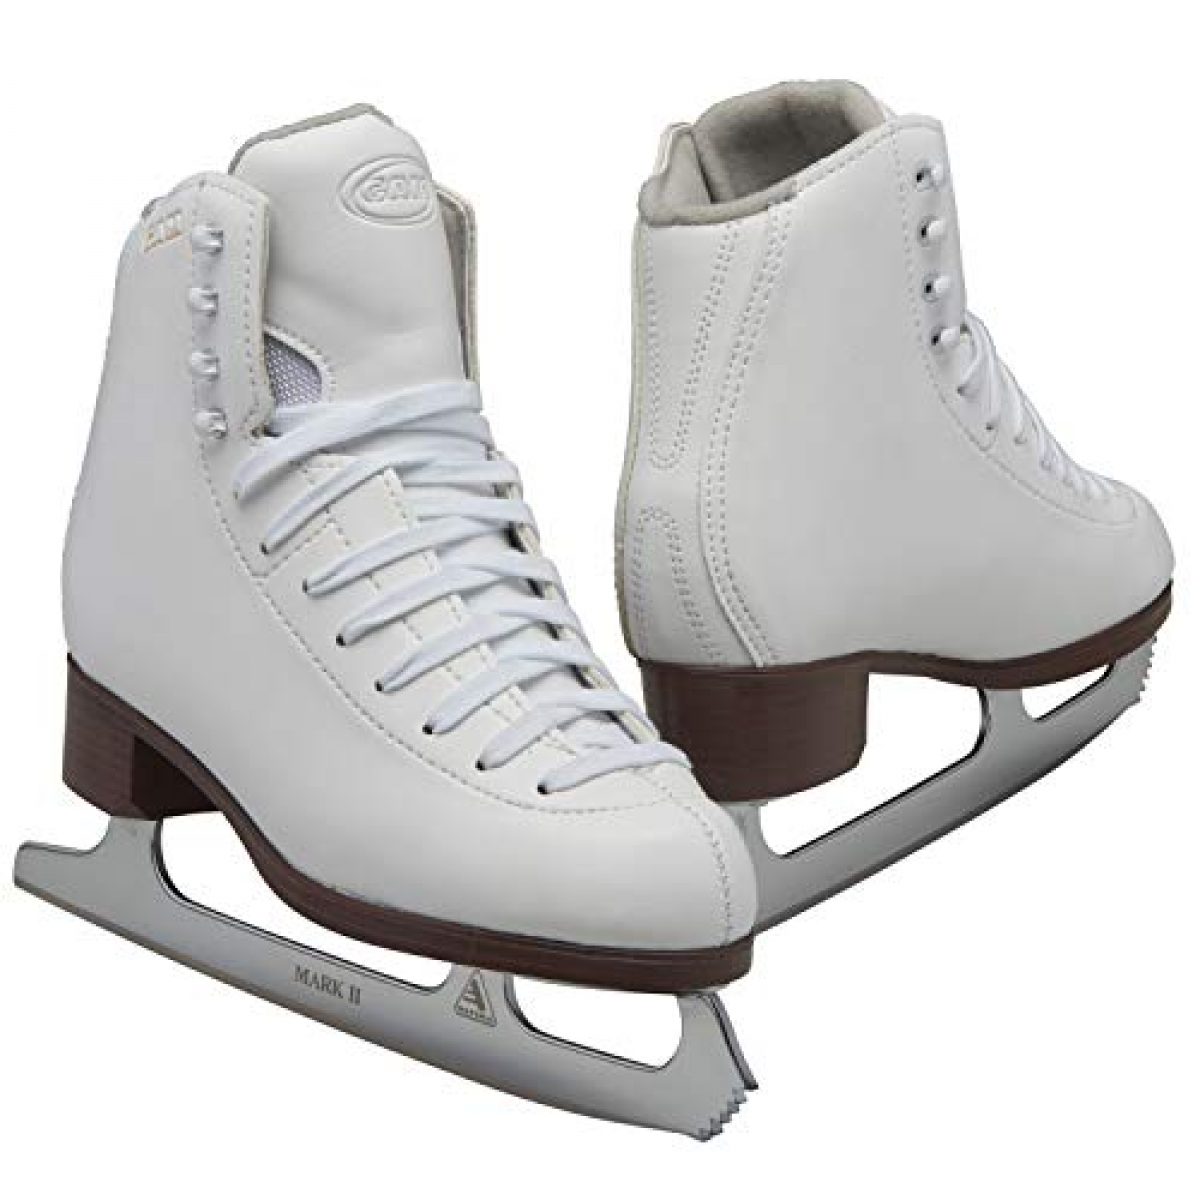 Ice Skating Best Offer ⋆ Ice Skating Best Deals at OutdoorFull.com